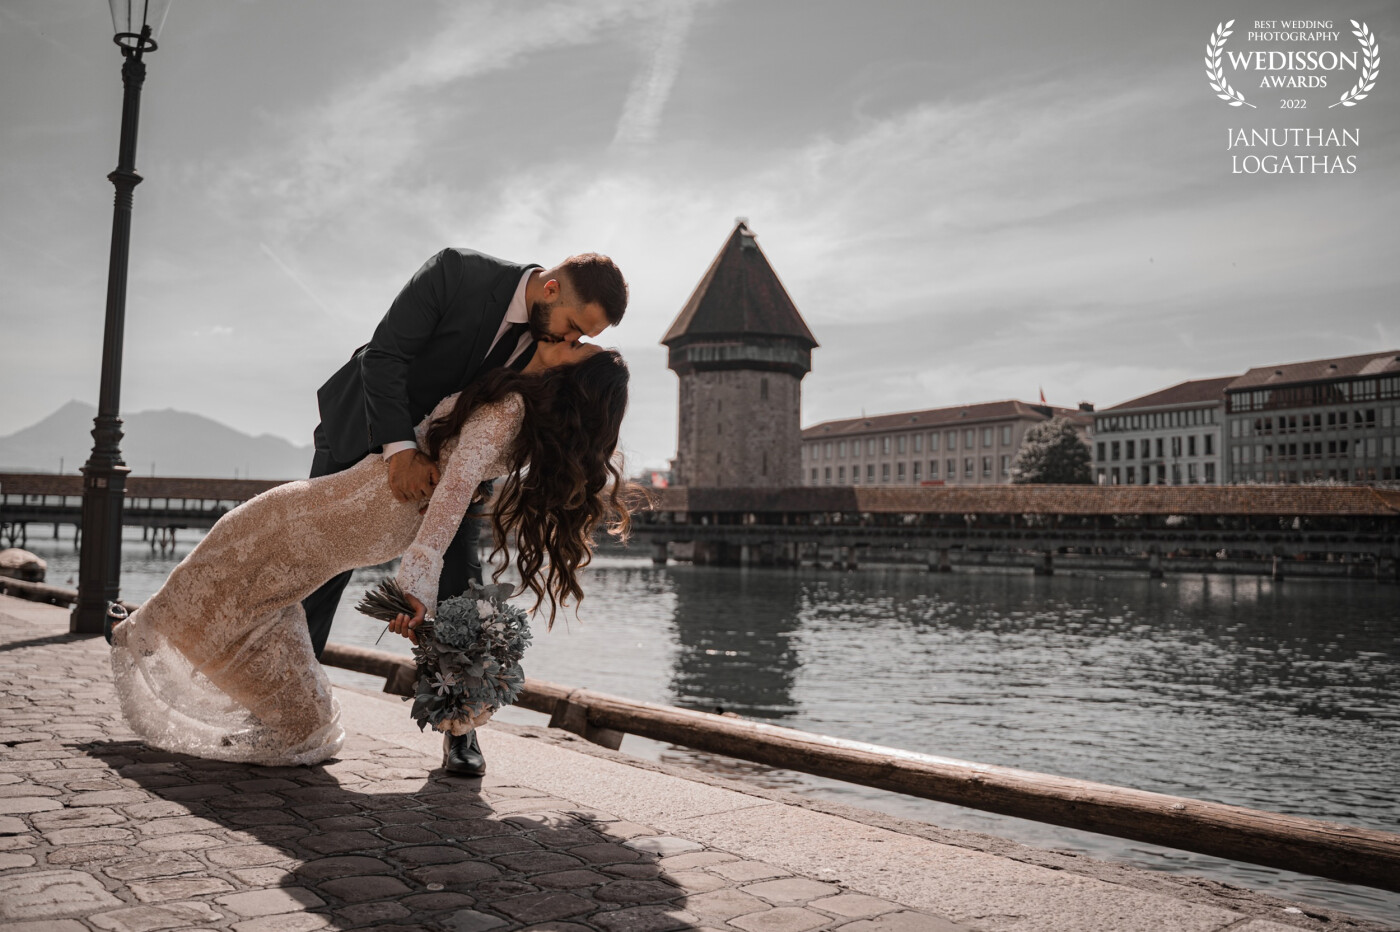 Since 1365 many lovers kissed their promise for their eternal love on this majestic bridge and the story continues with Antigona and Driton. An honor to capture the newly-weds in Lucerne.